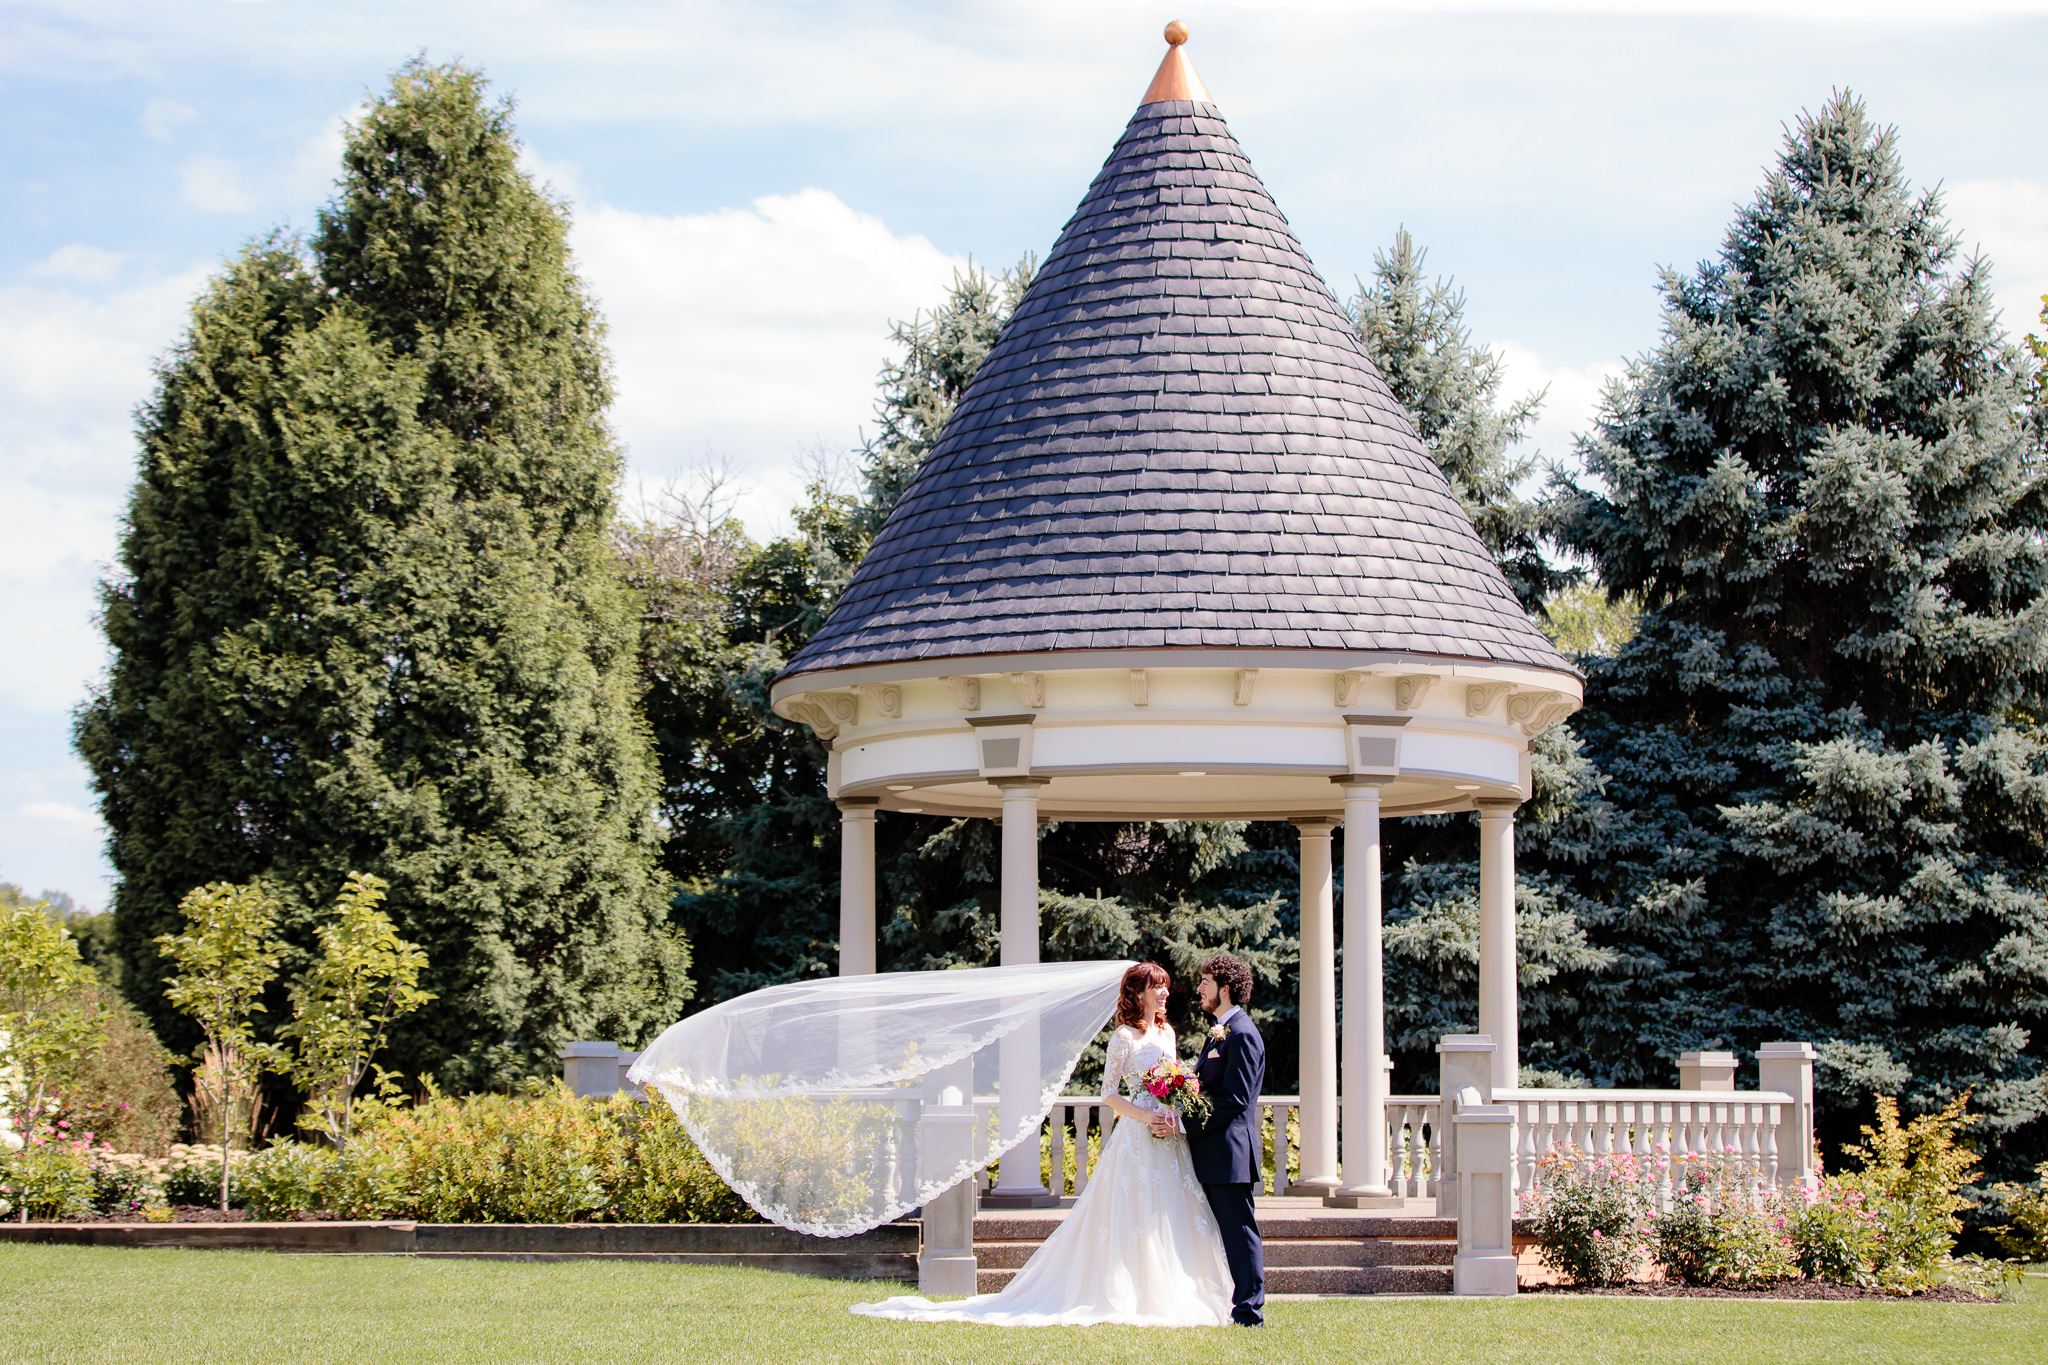 Bride's cathedral veil blows in the wind in front of the gazebo at Beaver Station